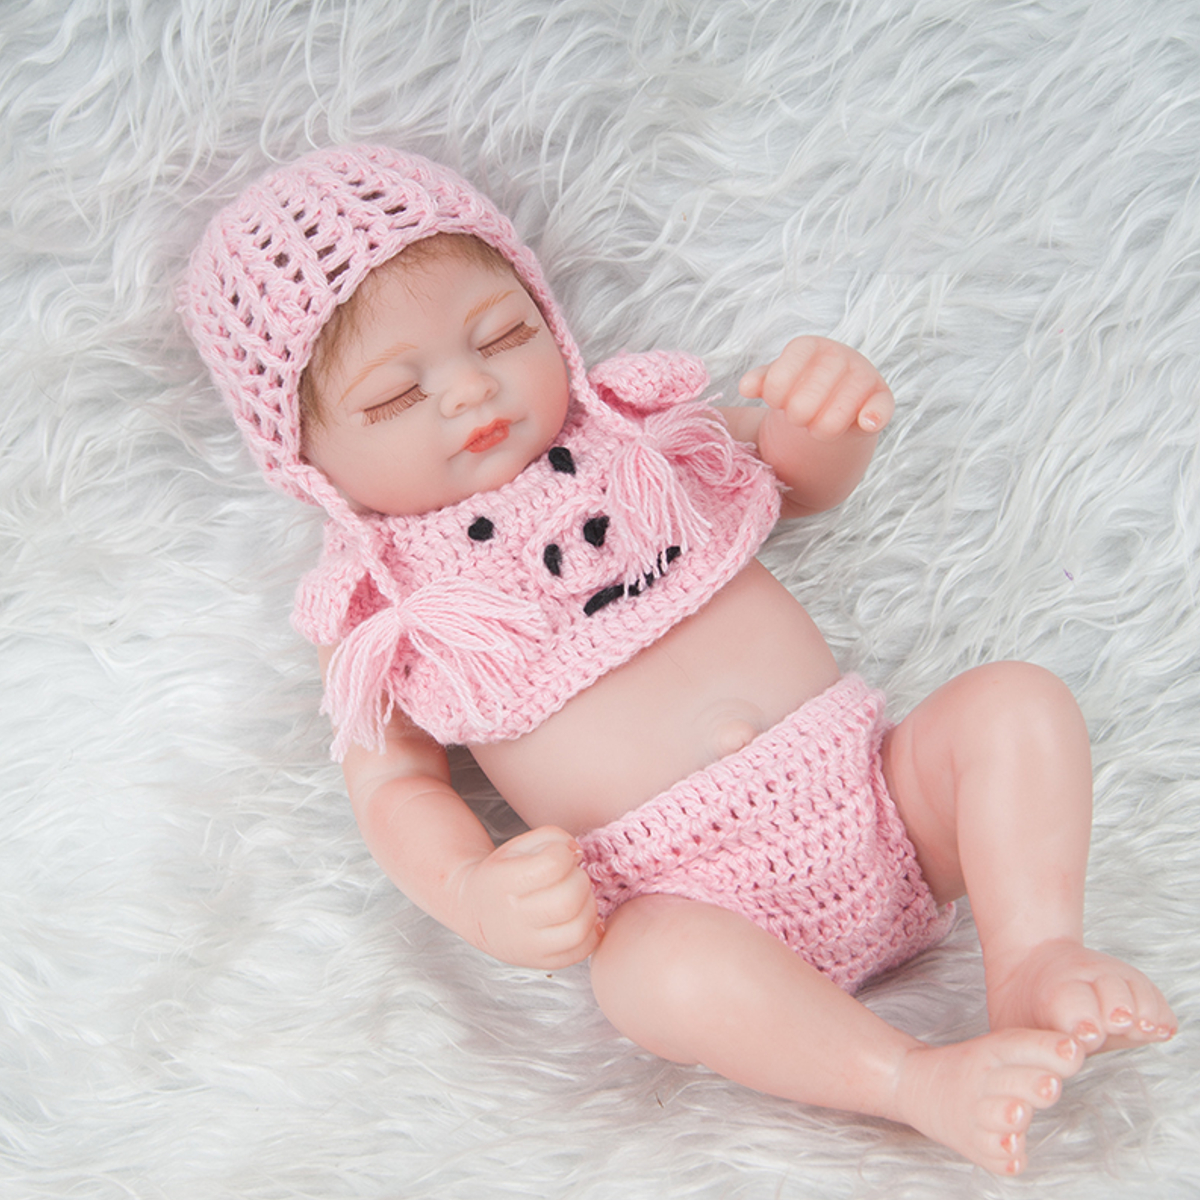 28CM-Soft-Silicone-Vinyl-Realistic-Sleeping-Reborn-Lifelike-Newborn-Baby-Doll-Toy-with-Moveable-Head-1731373-5